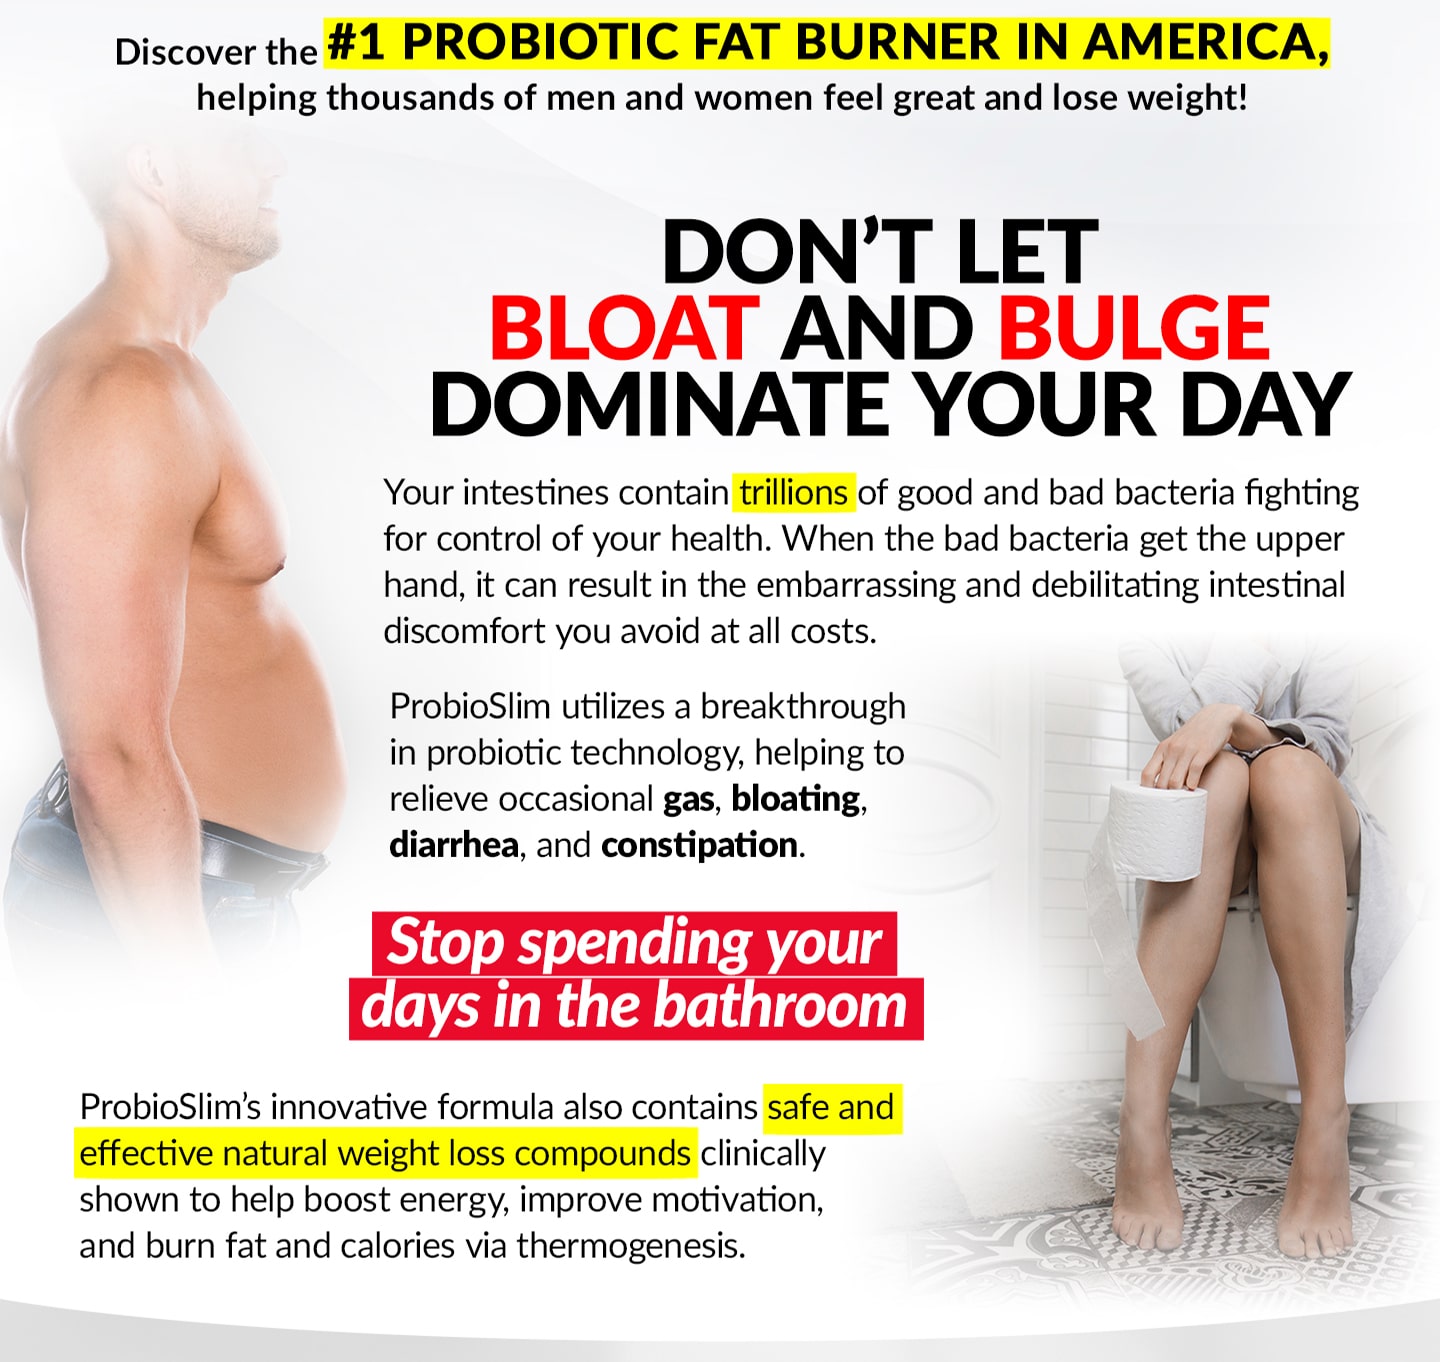 Discover the #1 PROBIOTIC FAT BURNER IN AMERICA, helping thousands of men and women feel great and lose weight! DON’T LET BLOAT AND BULGE DOMINATE YOUR DAY. Your intestines contain trillions of good and bad bacteria fighting for control of your health. When the bad bacteria get the upper hand, it can result in the embarrassing and debilitating intestinal discomfort you avoid at all costs. ProbioSlim utilizes a breakthrough in probiotic technology, helping to relieve occasional gas, bloating, diarrhea, and constipation. Stop spending your days in the bathroom! ProbioSlim’s innovative formula also contains safe and effective natural weight loss compounds clinically shown to help boost energy, improve motivation, and burn fat and calories via thermogenesis.